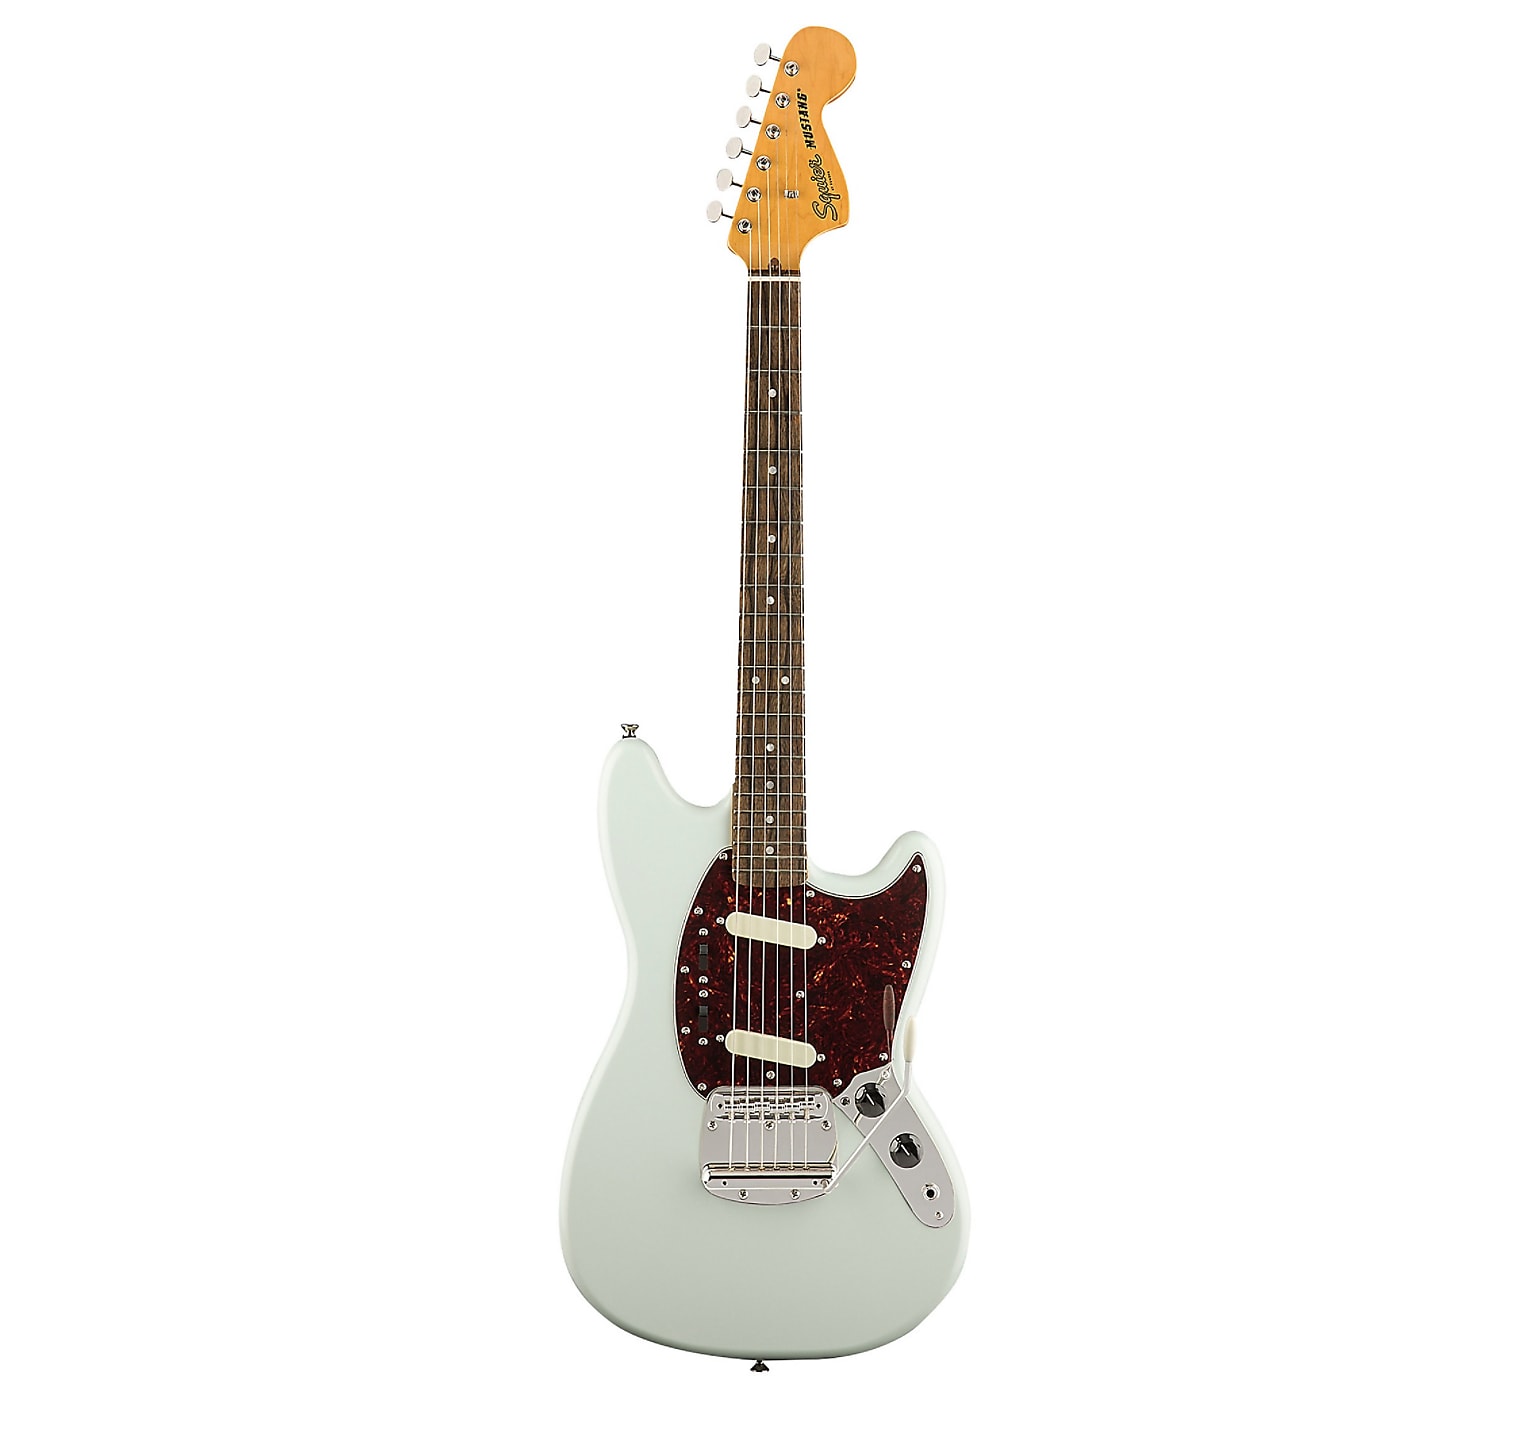 Squier Vintage Modified Mustang Electric Guitar | Reverb Canada